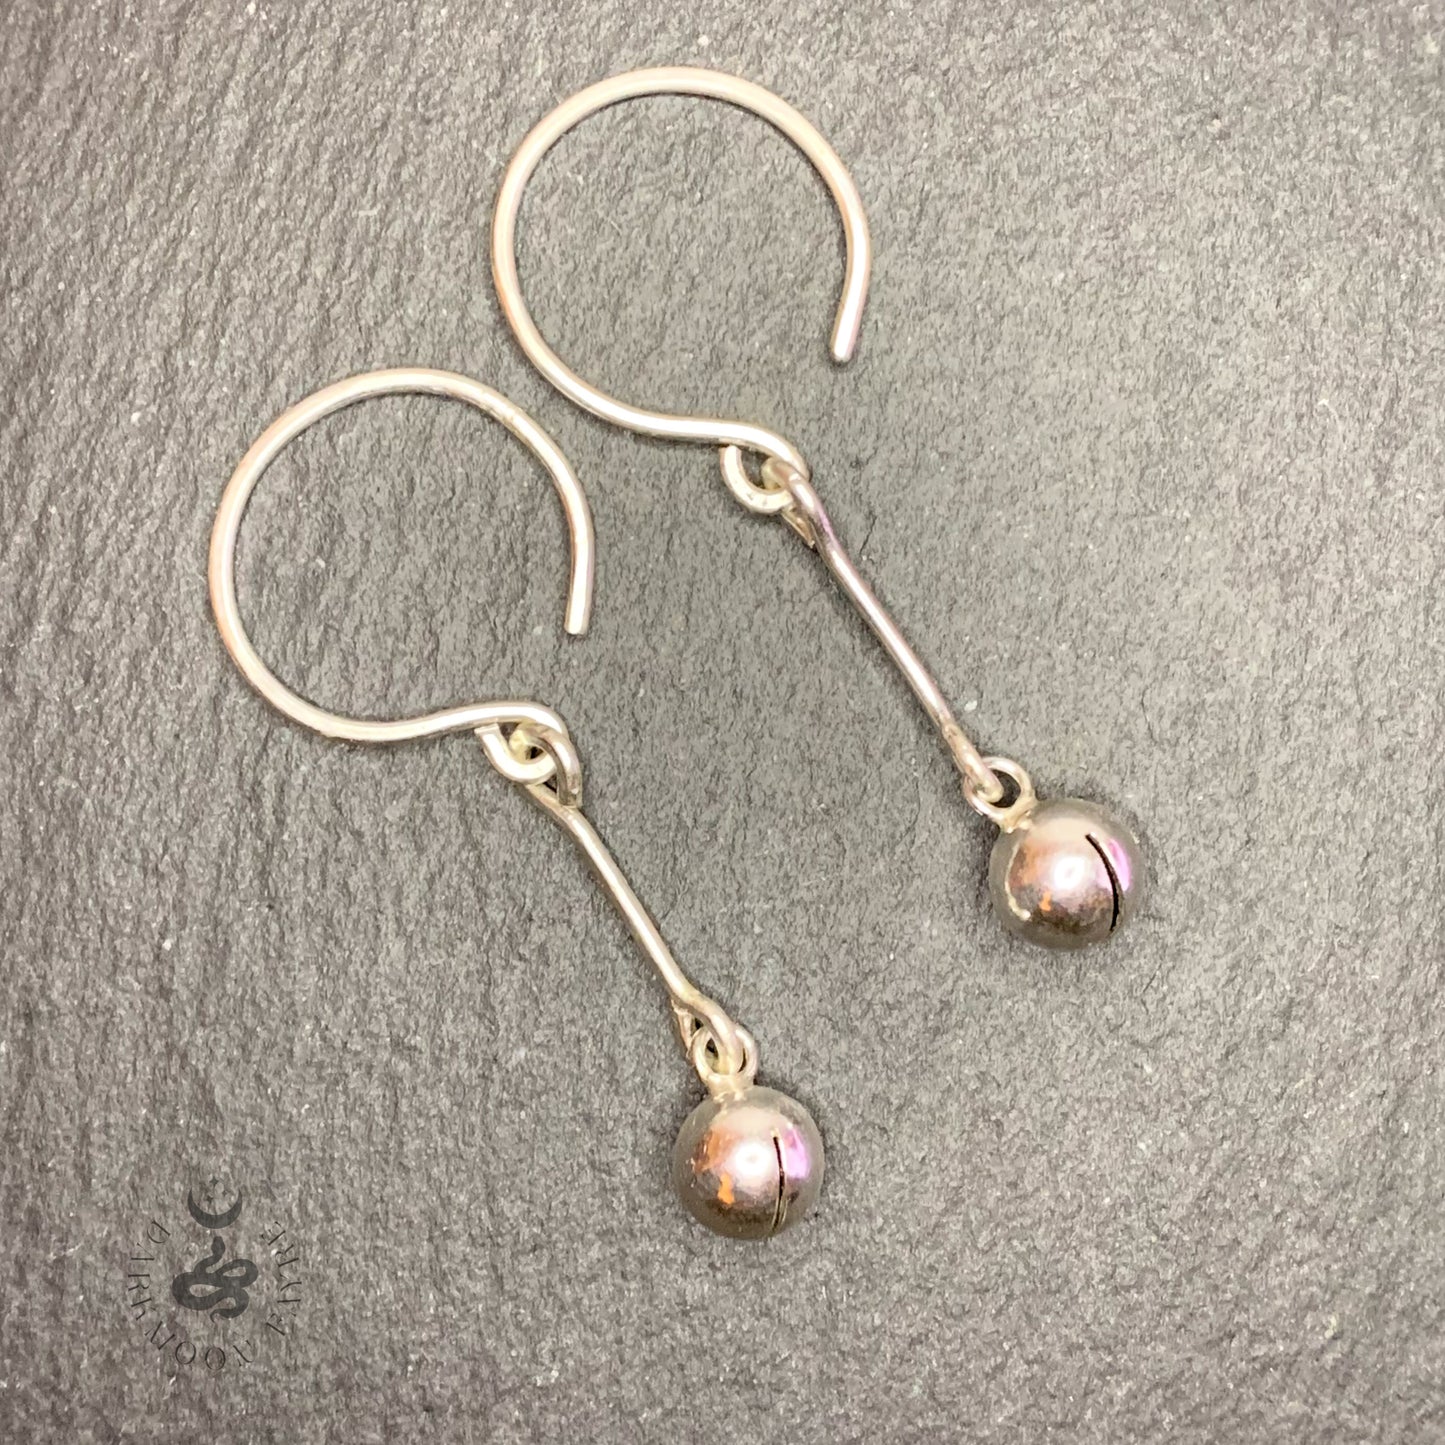 Jingle Witch Bell Earrings With Hand Forged Hoops And Bars In All 925 Sterling Silver - Darkmoon Fayre